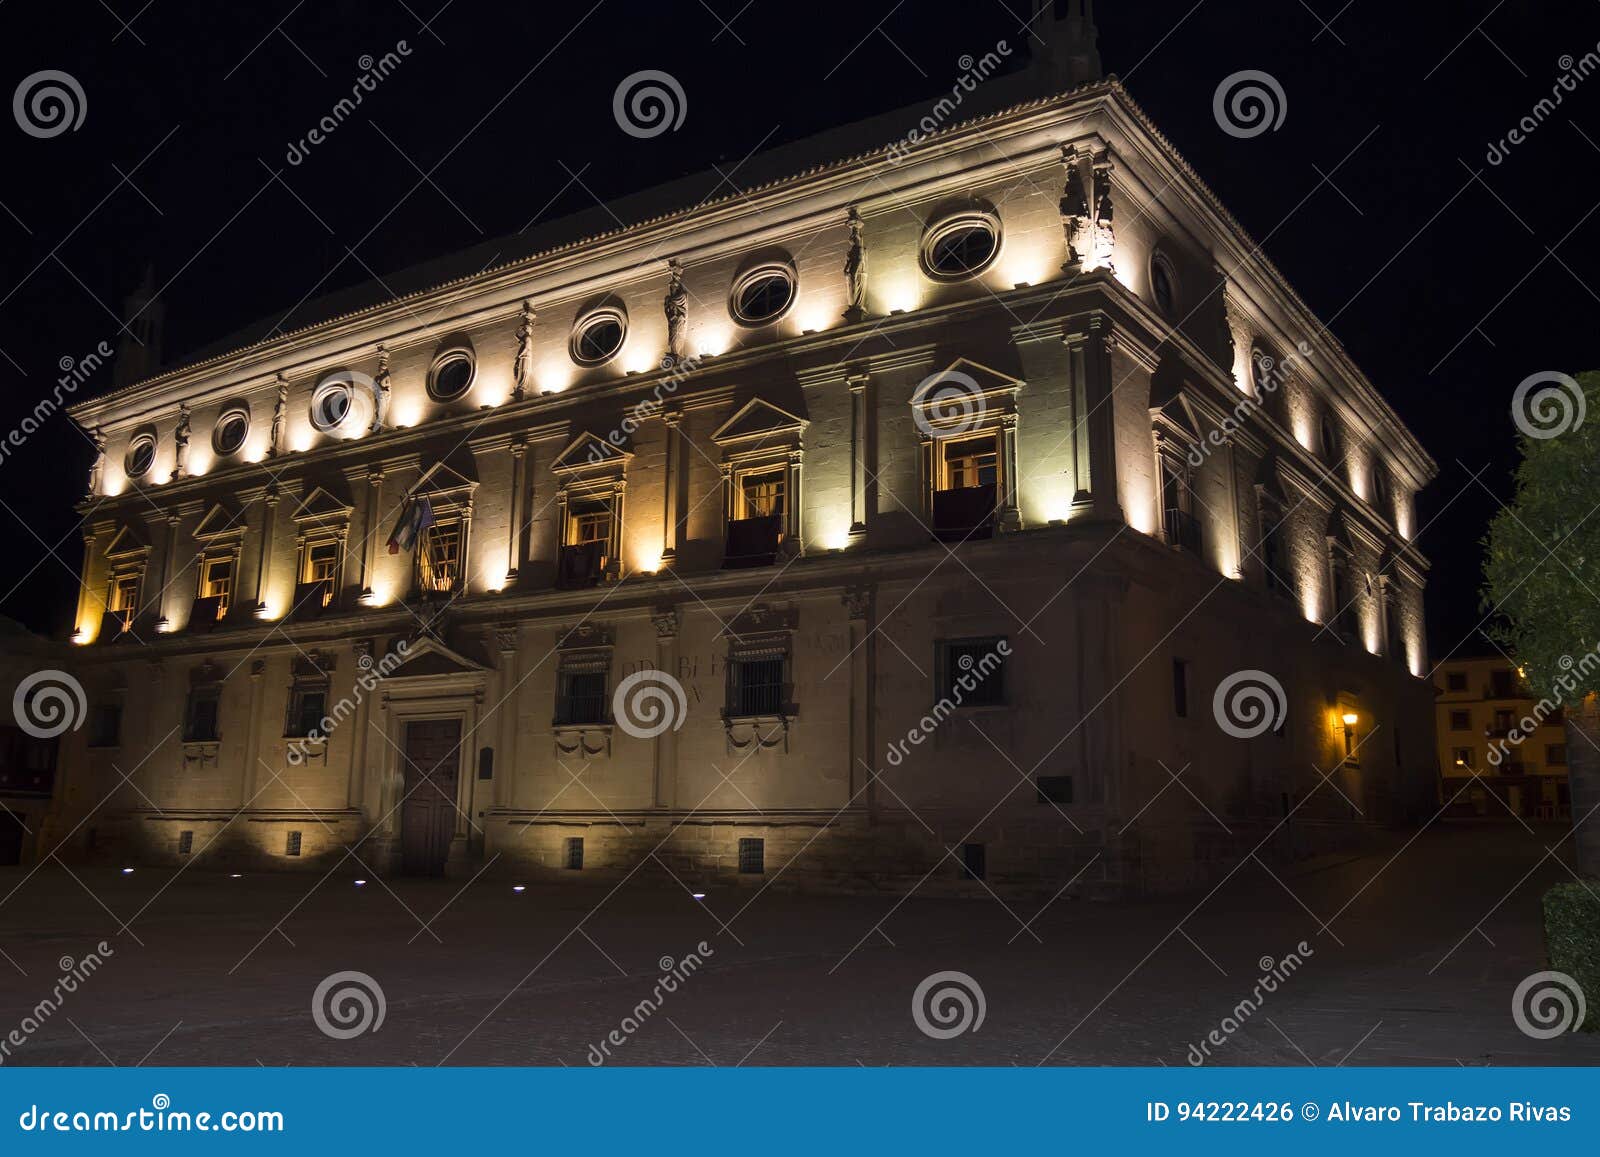 vazquez de molina palace palace of the chains at night, ubeda,